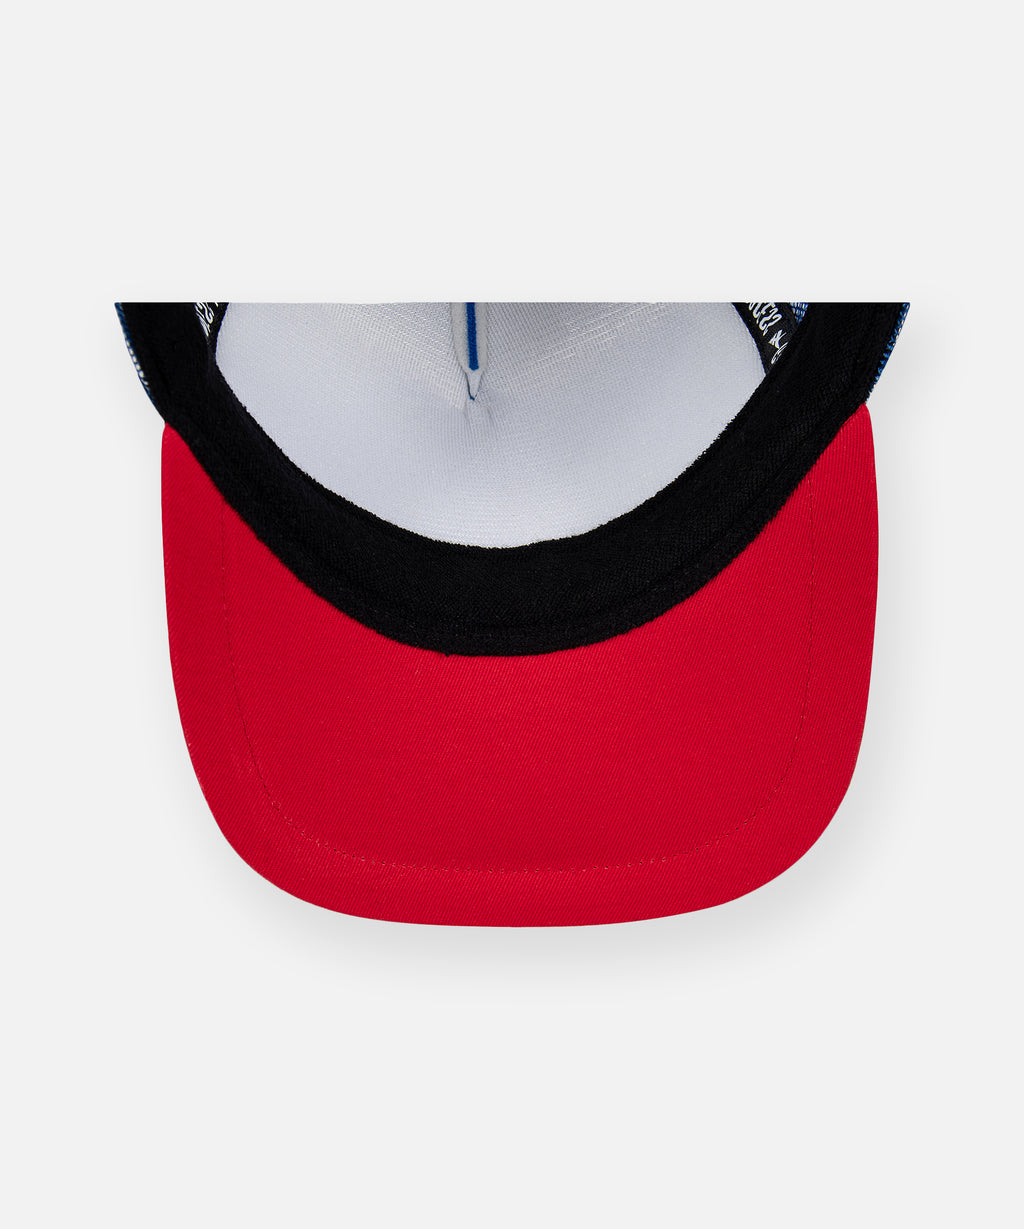  Red undervisor on Planes Greatness Trucker Hat color Nautical Blue.